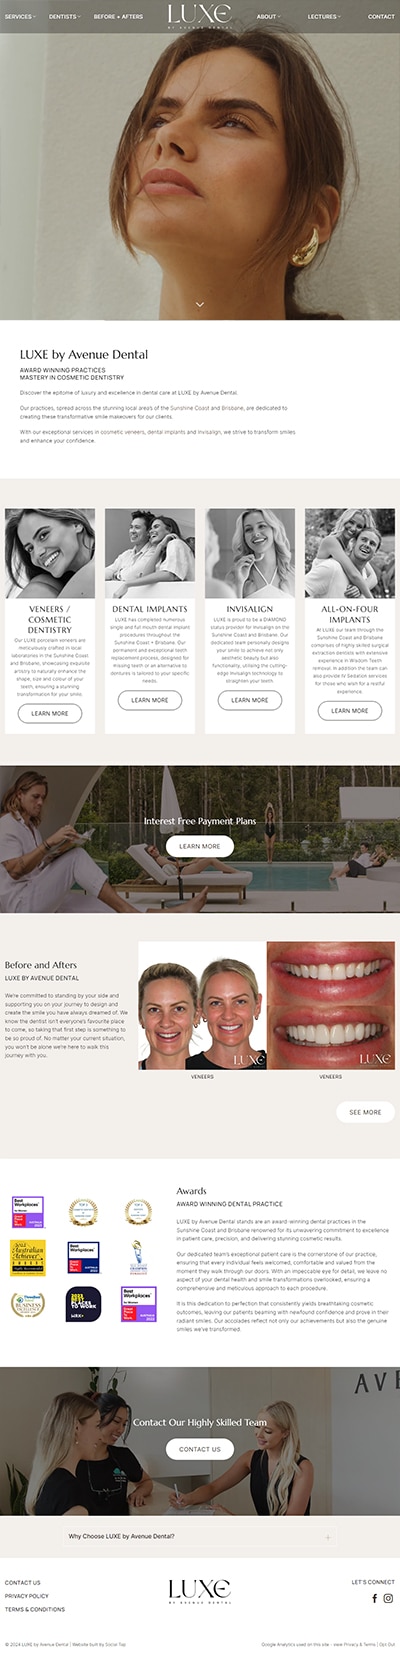 Our Work Hospitality Tourism Website Design Luxe By Avenue Dental